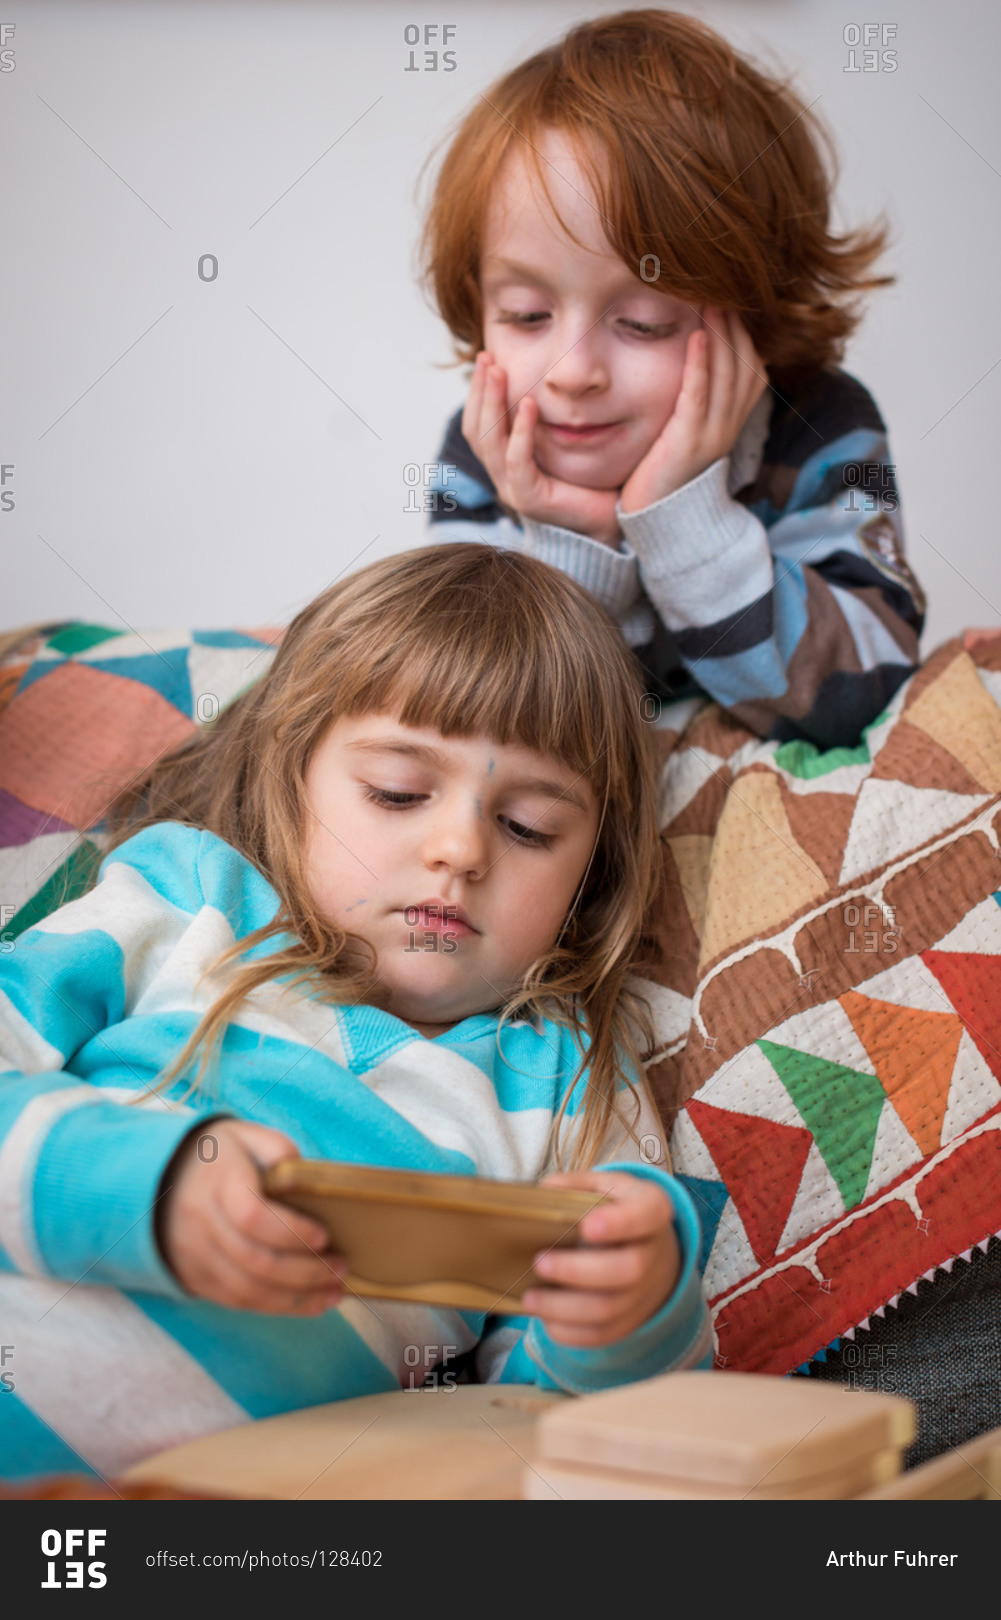 Girl playing on smartphone while a boy watching it